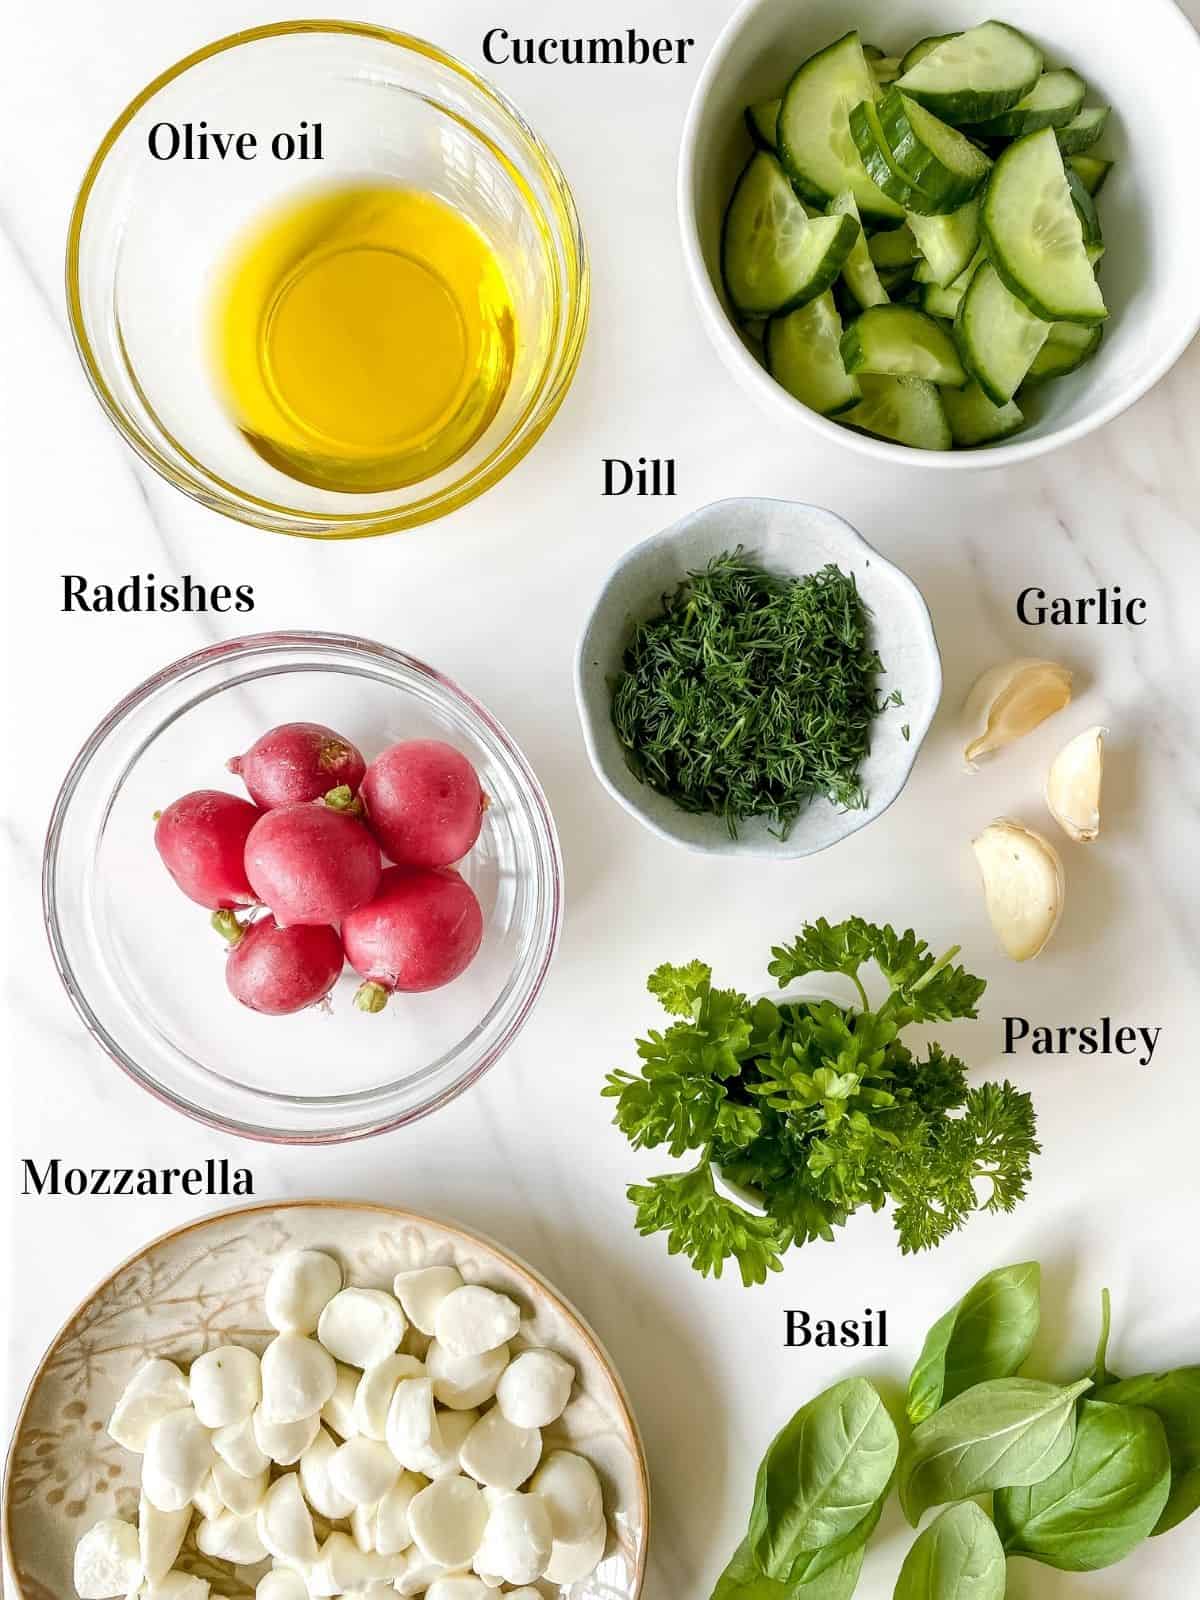 bowl of olive oil, bowl of dill, bowl of cucumber, bowl of radishes, garlic, basil and parsley.